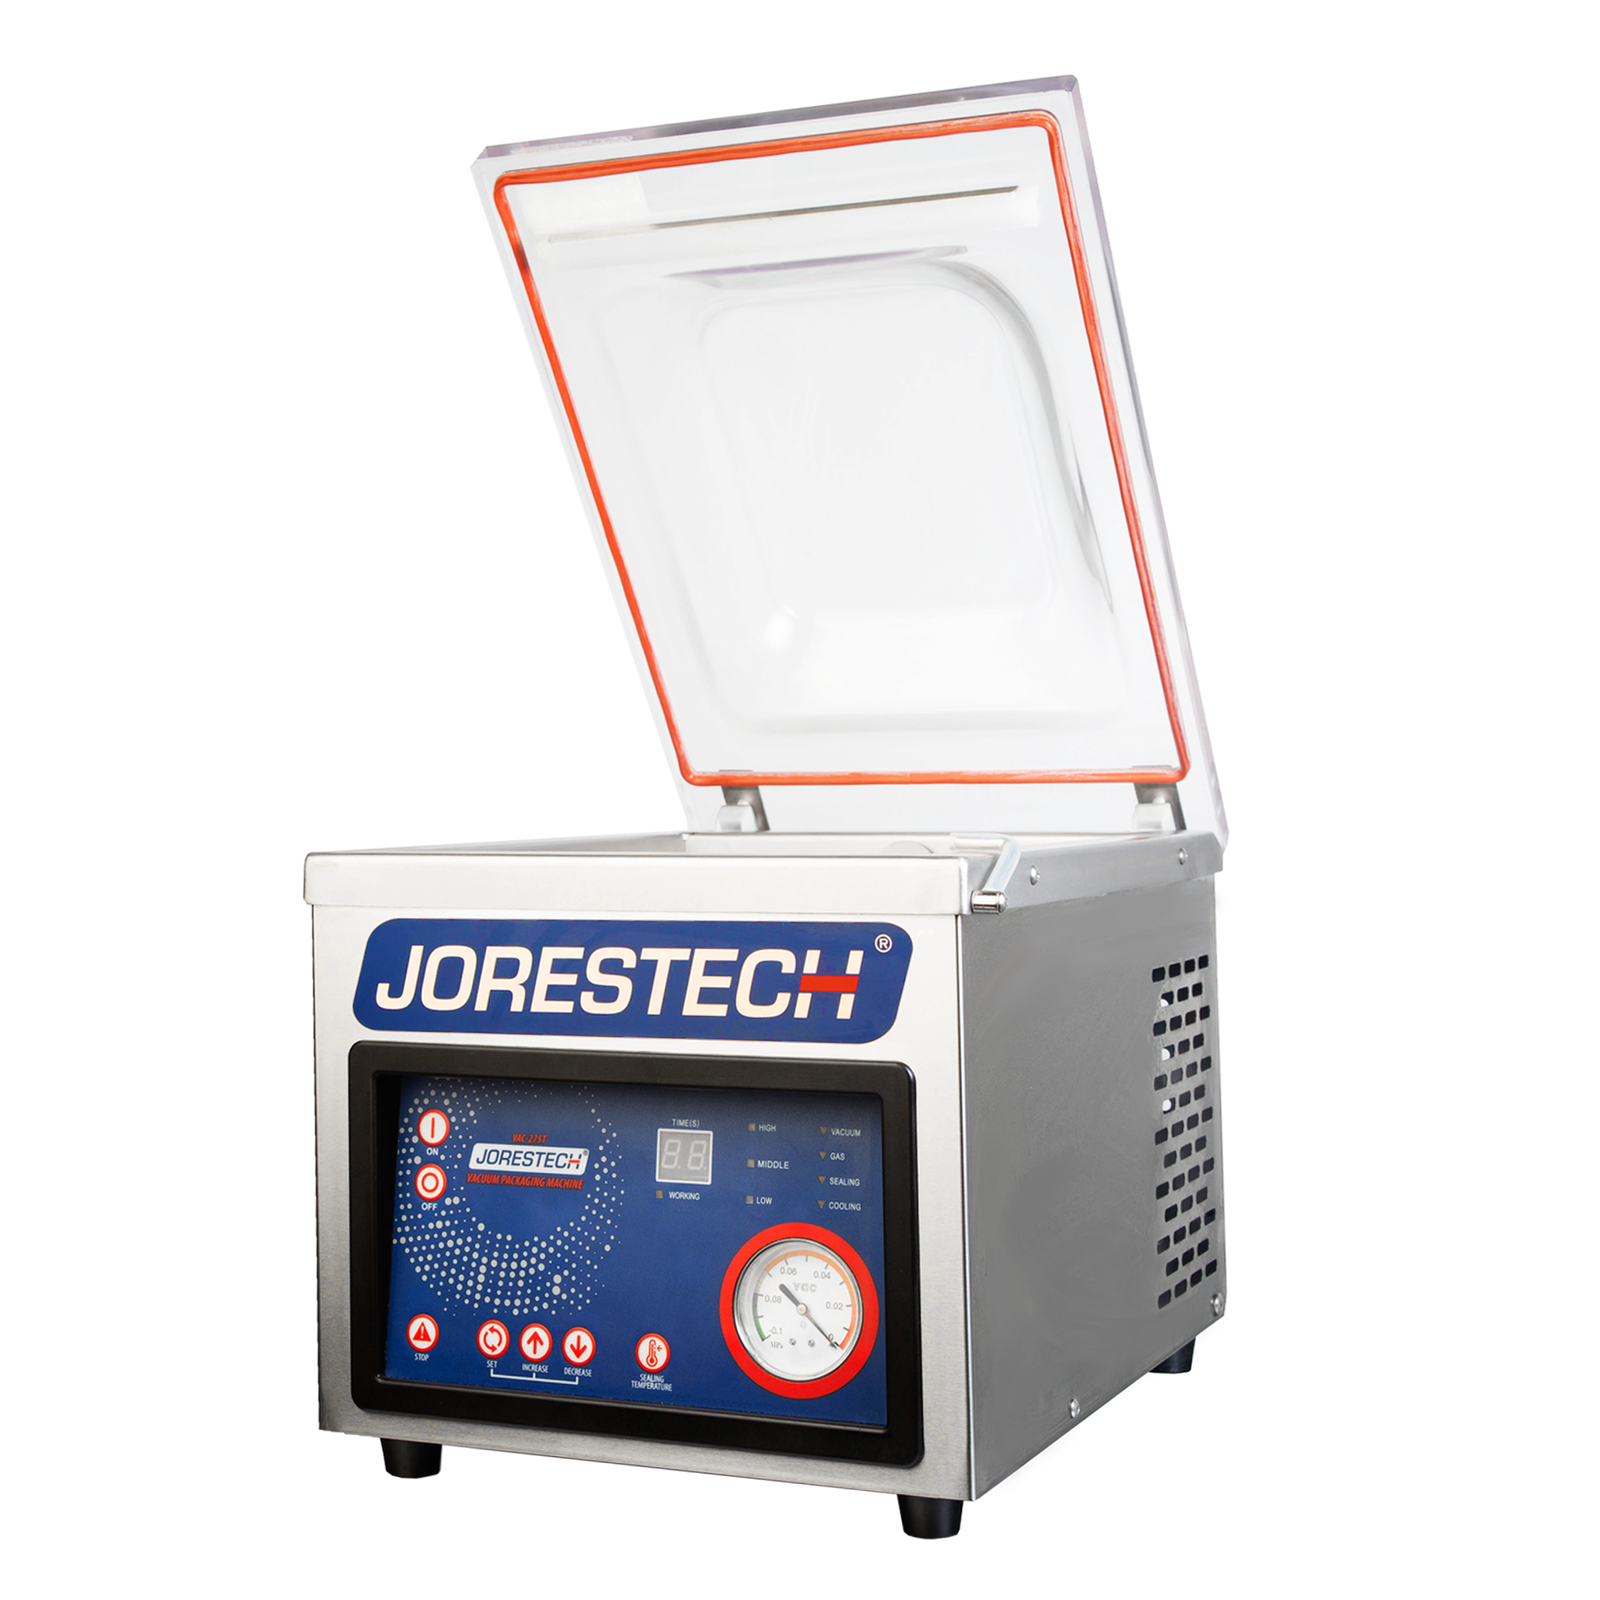 Side of the stainless steel JORESTECH tabletop commercial chamber vacuum sealer with one seal bar and the lid wide open